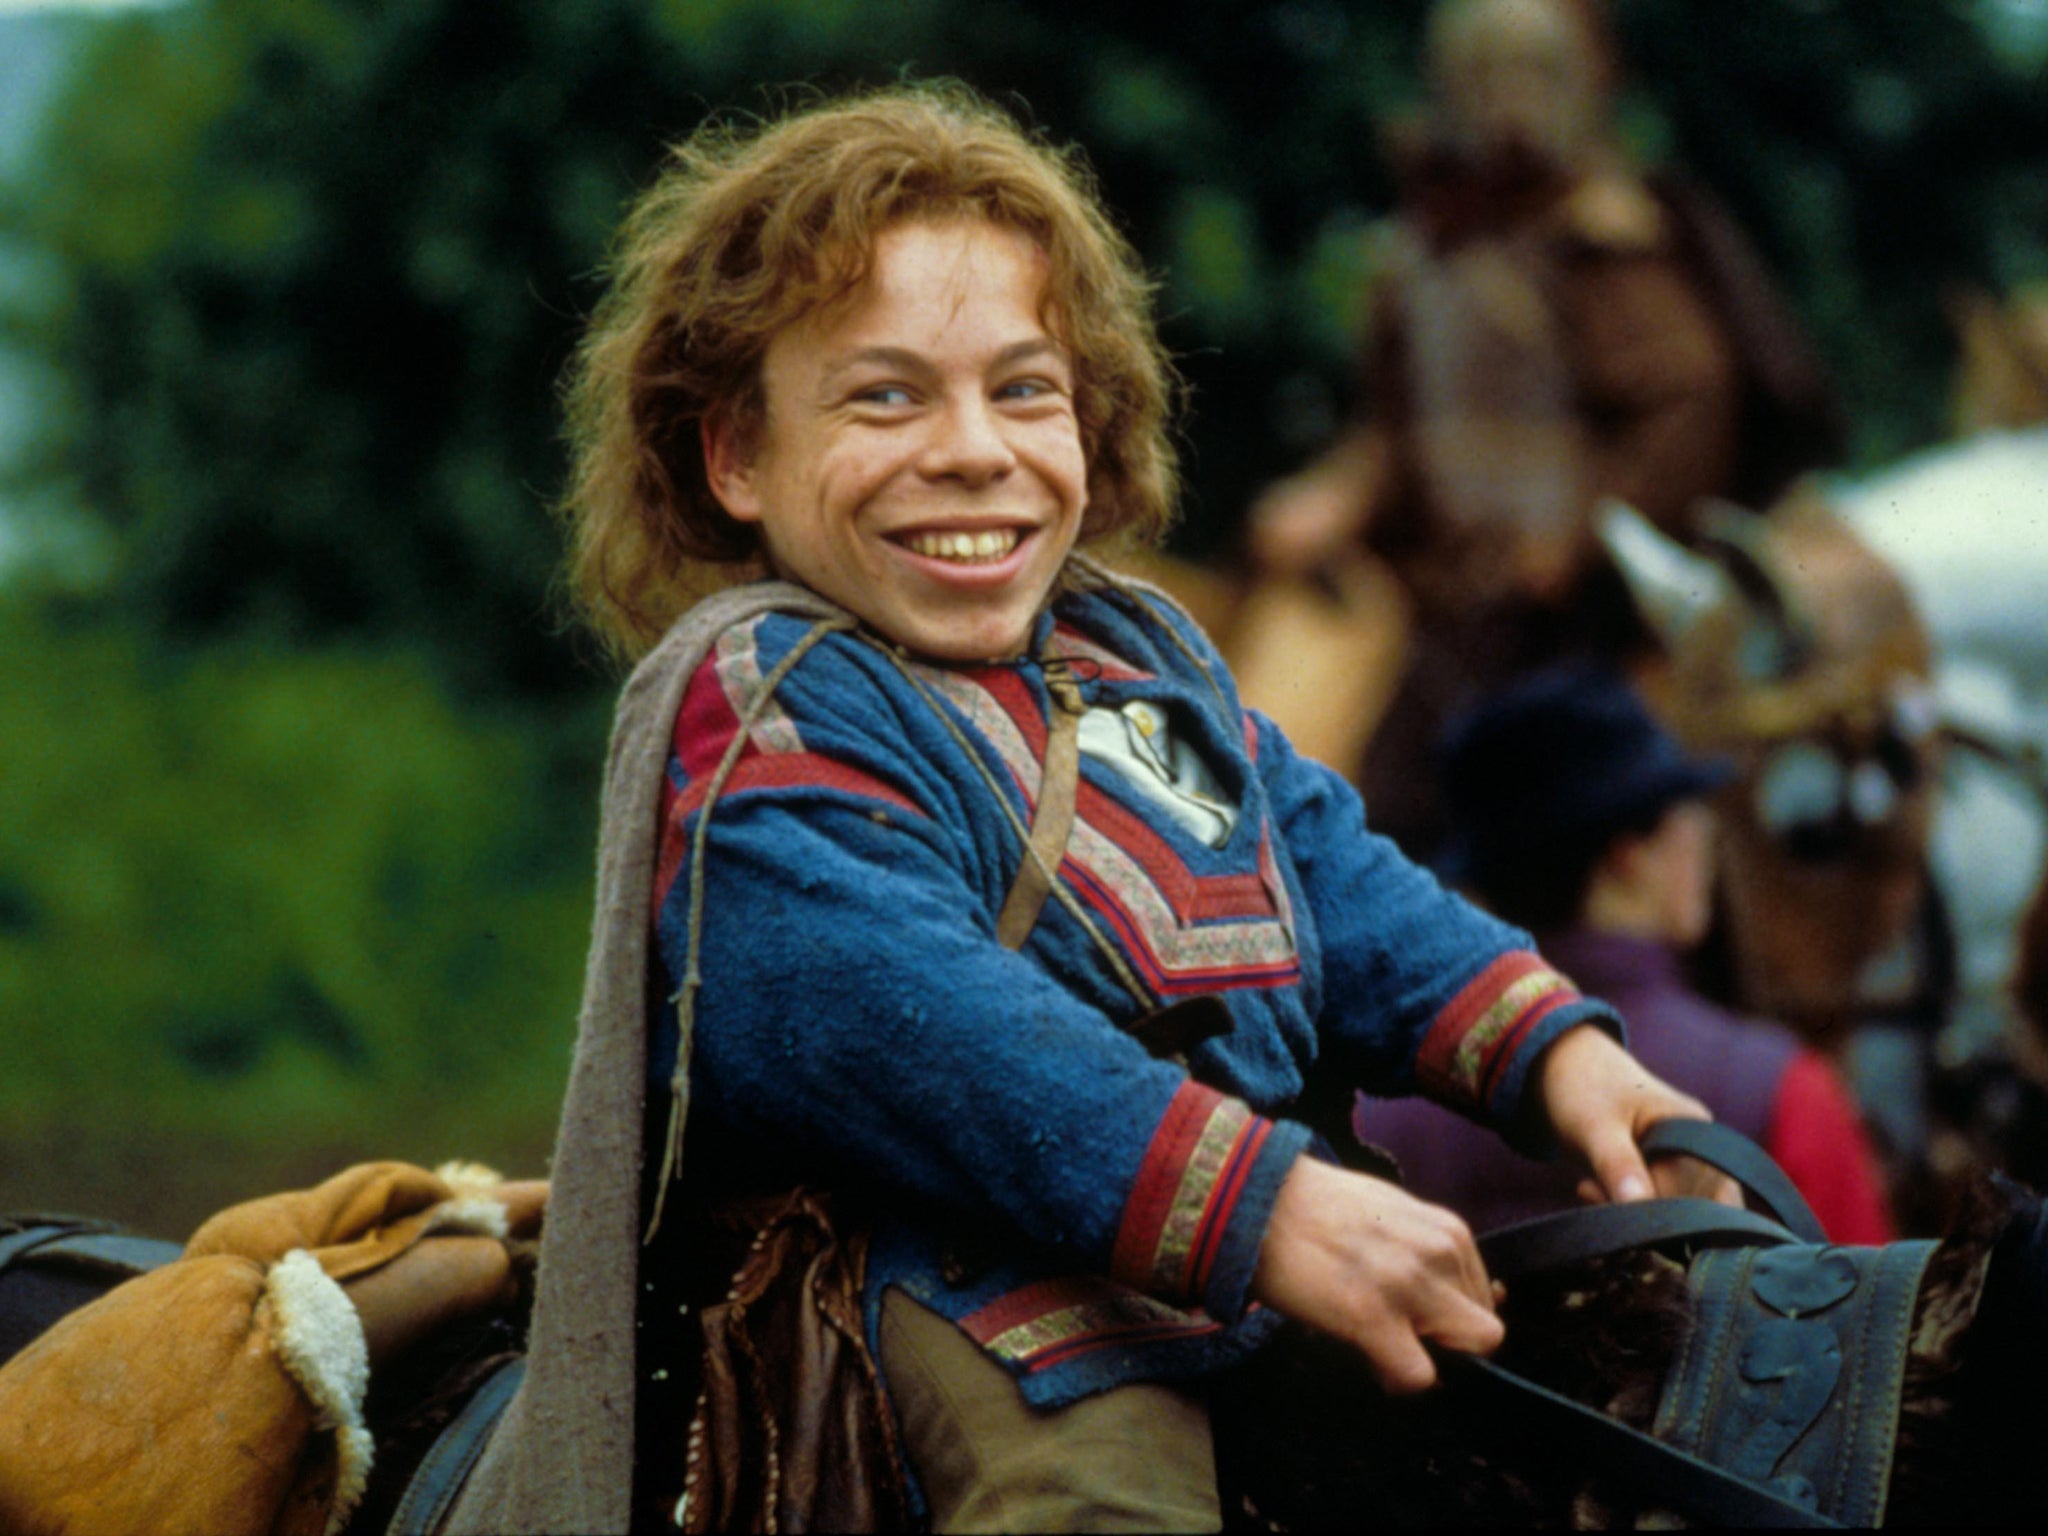 ‘The Hobbit’ and ‘Lord of the Rings in all but name – Warwick Davis in ‘Willow’